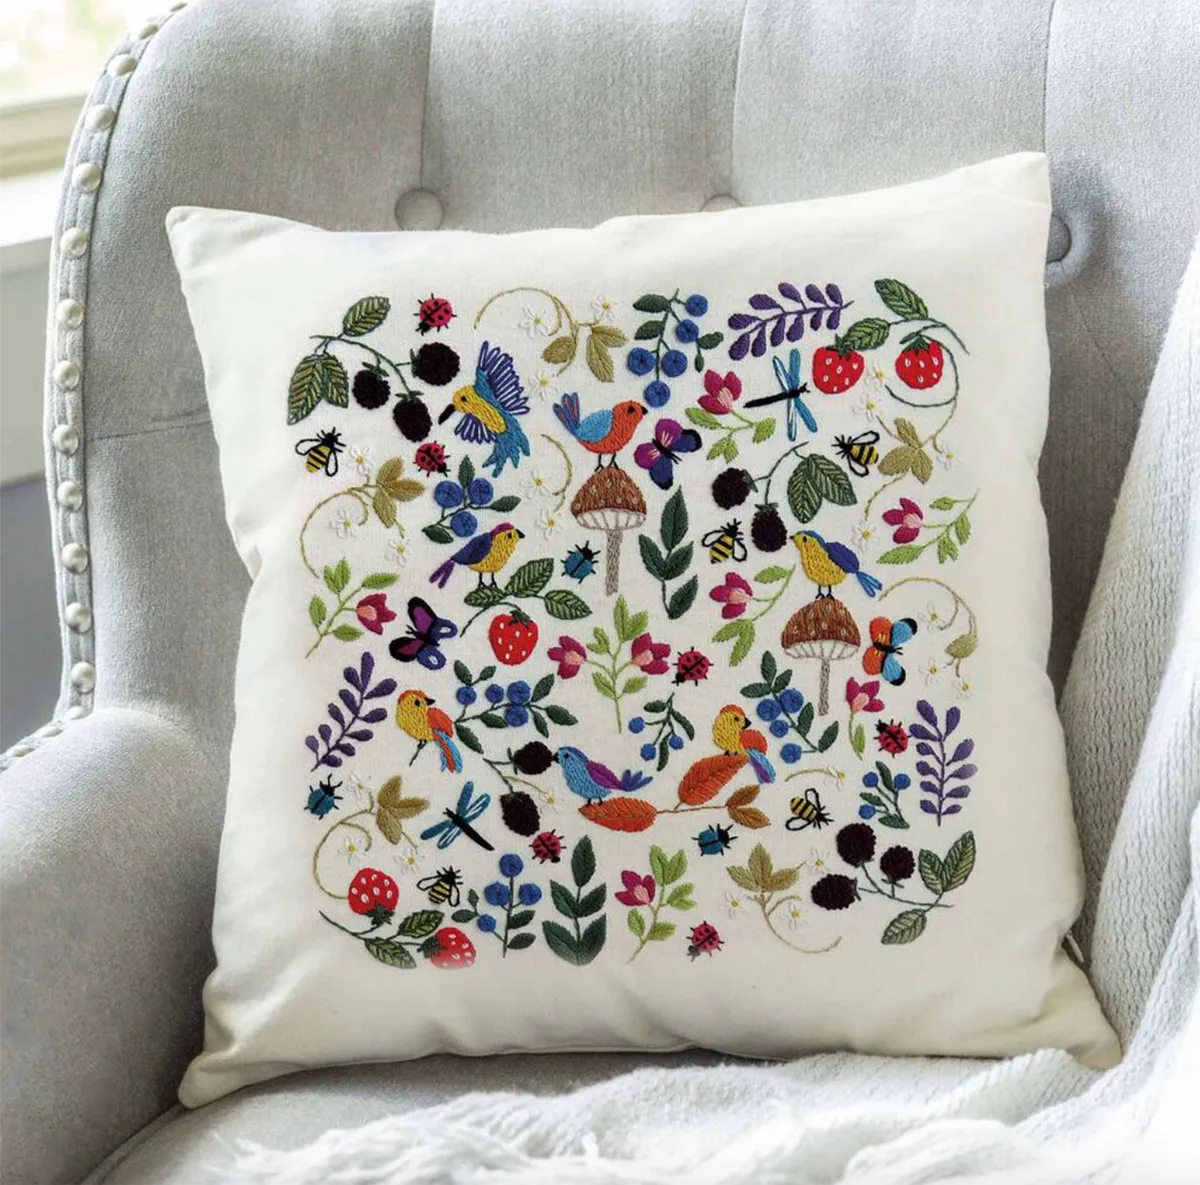 Bugs, birds and berries cushion embroidery kit